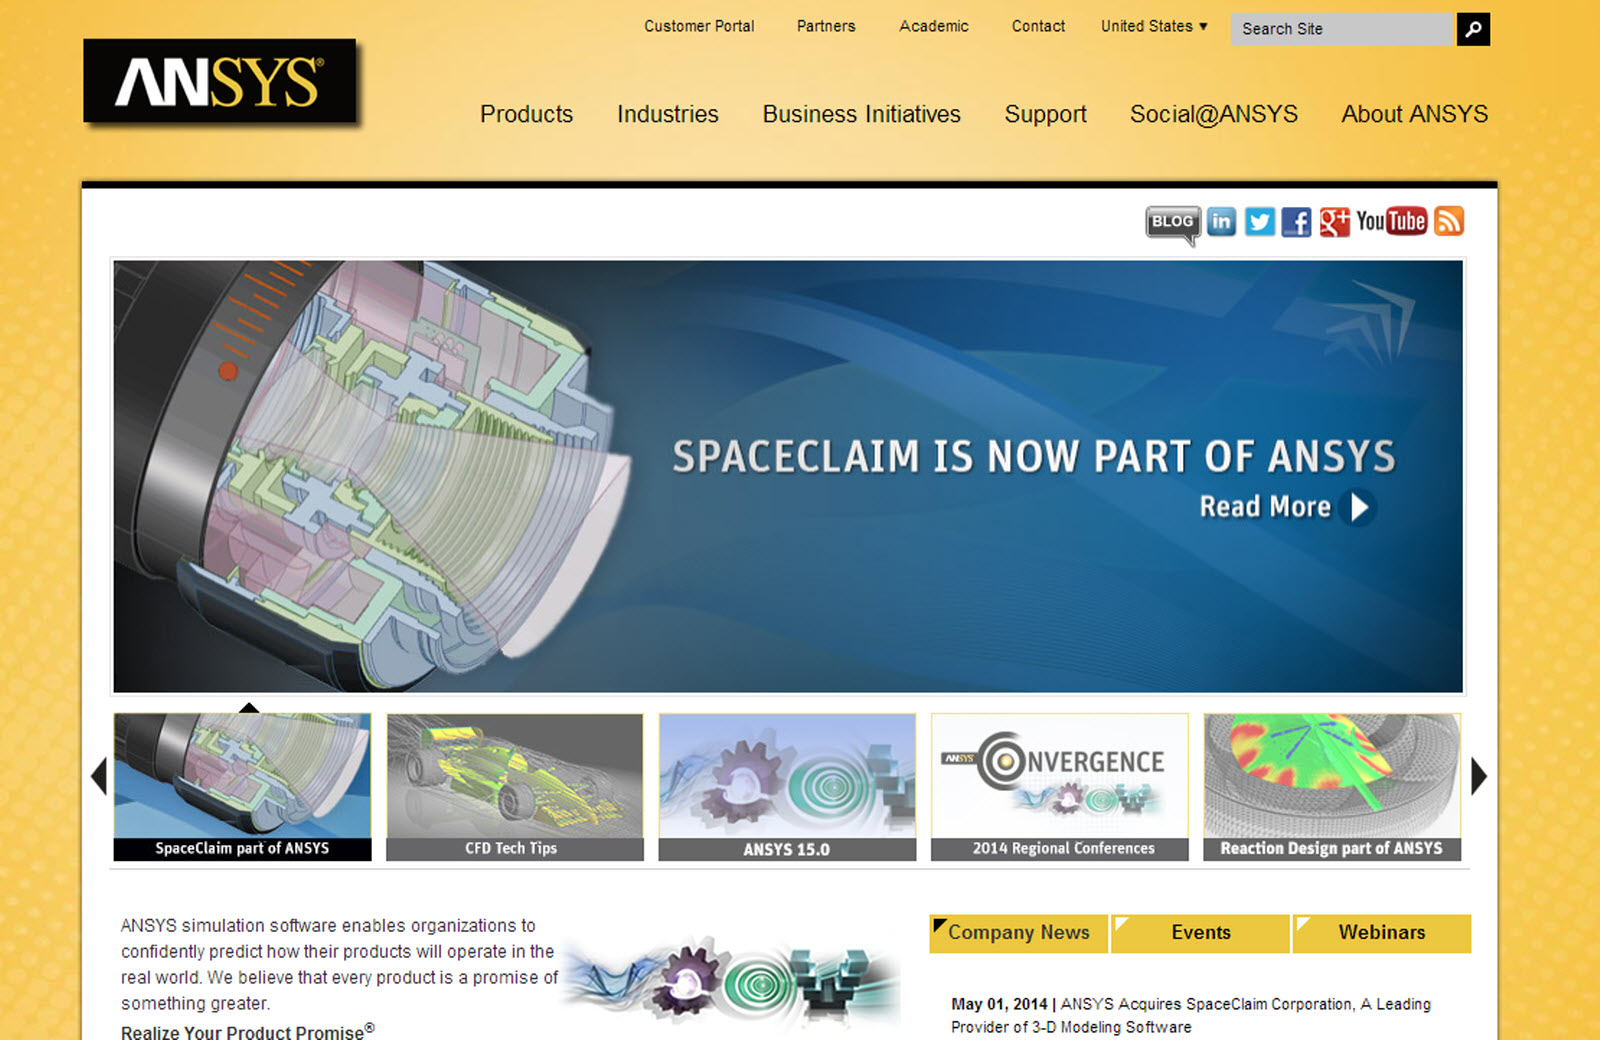 Ansys Acquires SpaceClaim